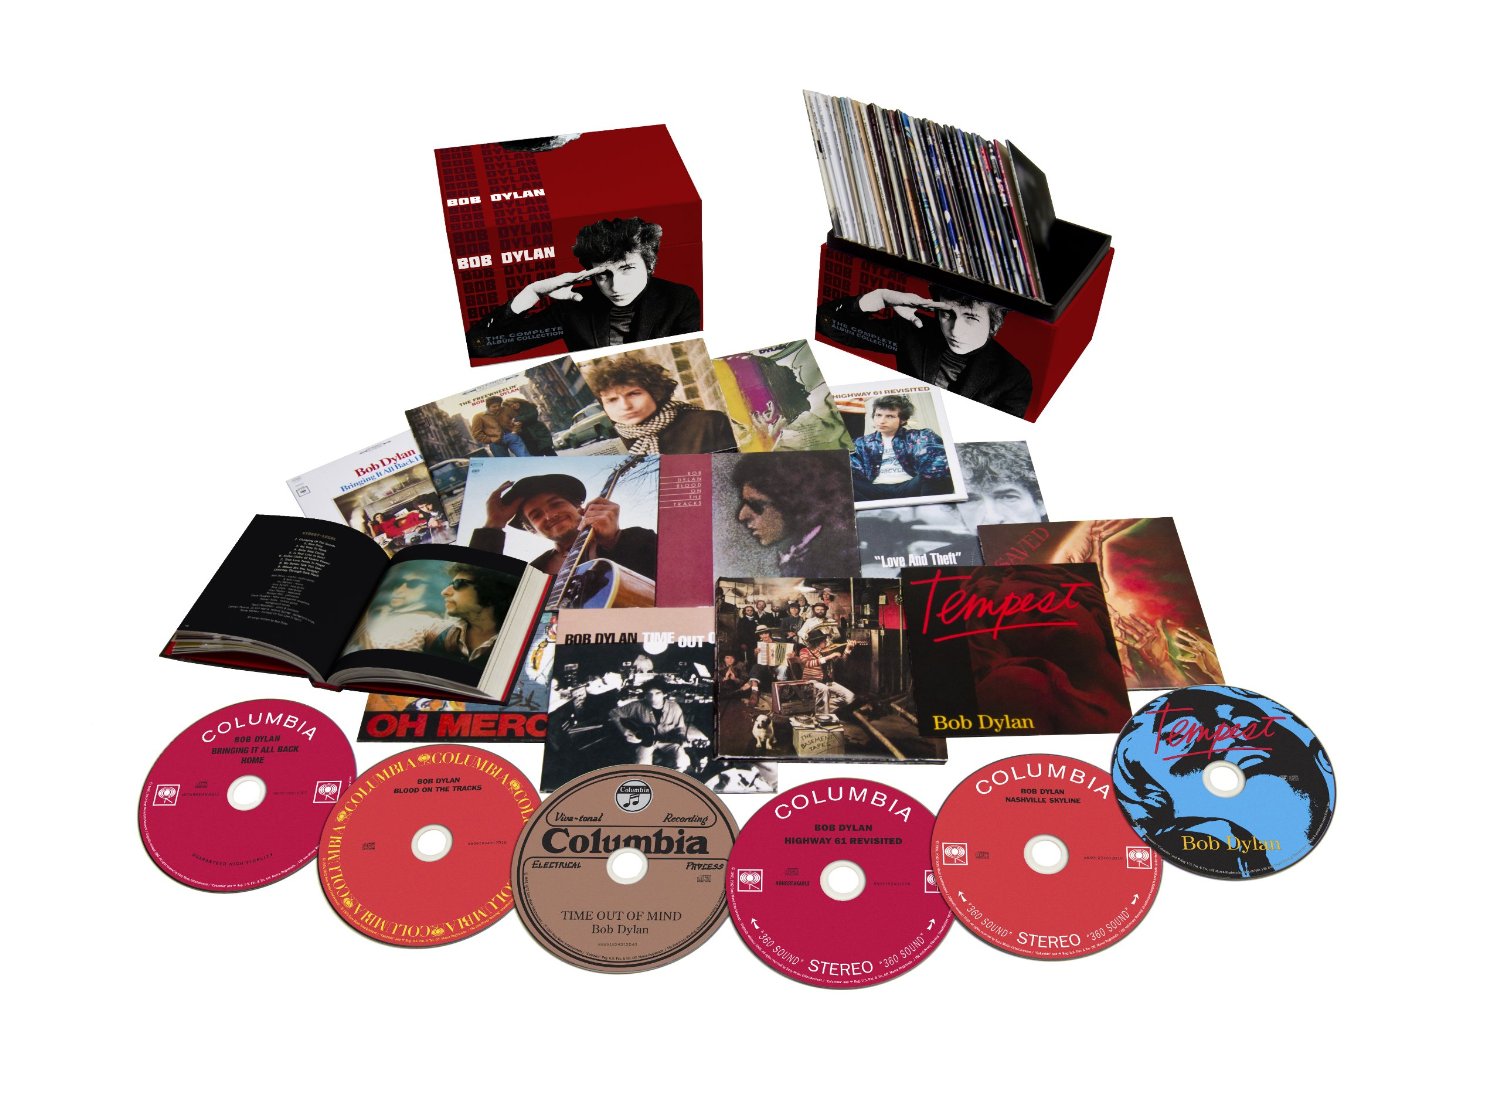 Bob Dylan’s Entire Career Collected In Massive New Box Set